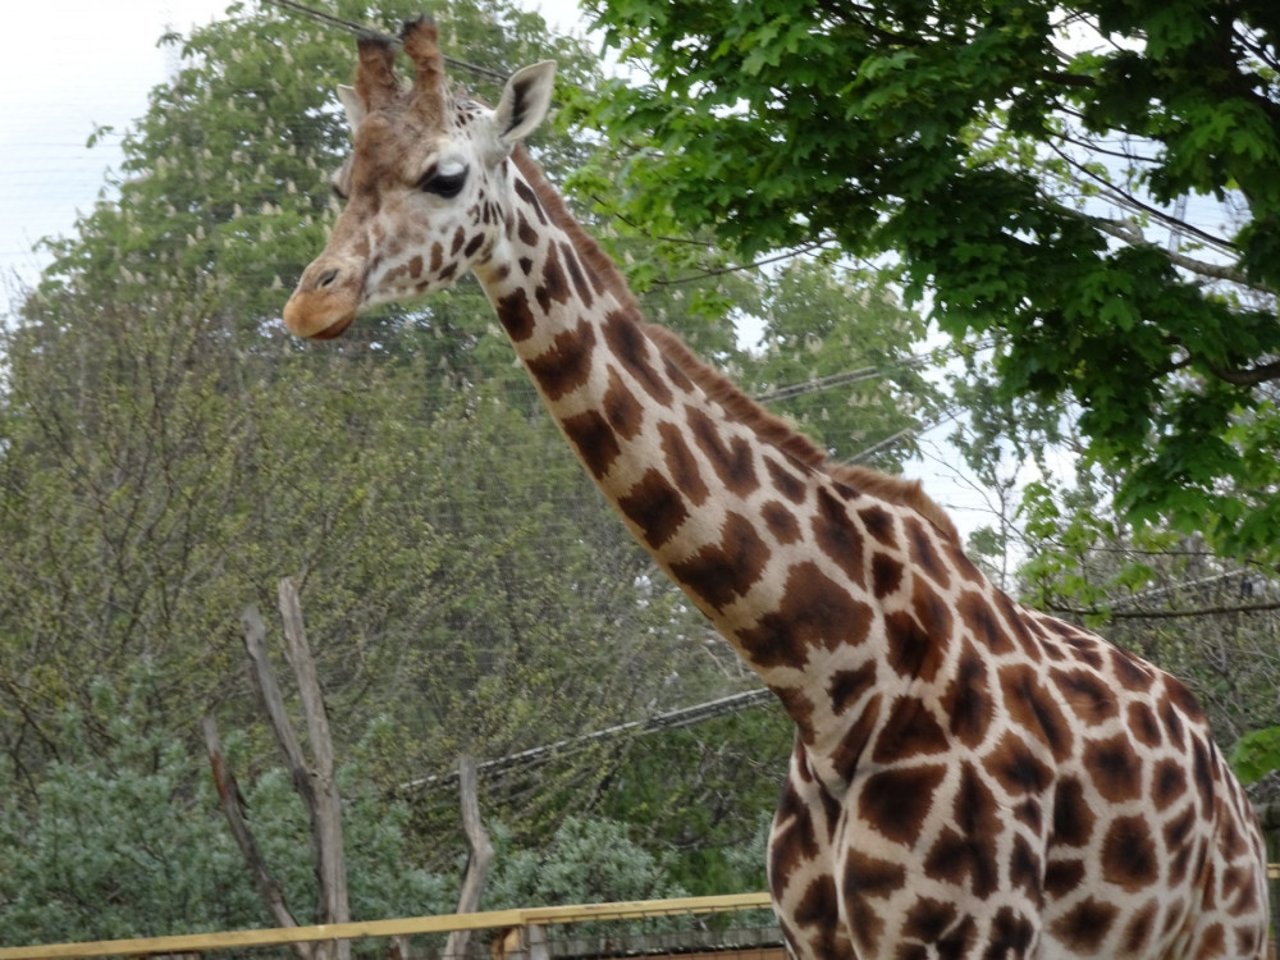 Hybrid giraffe in London Zoo, photograph by Shubhobroto Ghosh. A vicious and vindictive attitude persists in the zoo and conservation community toward animals of mixed genetic origin